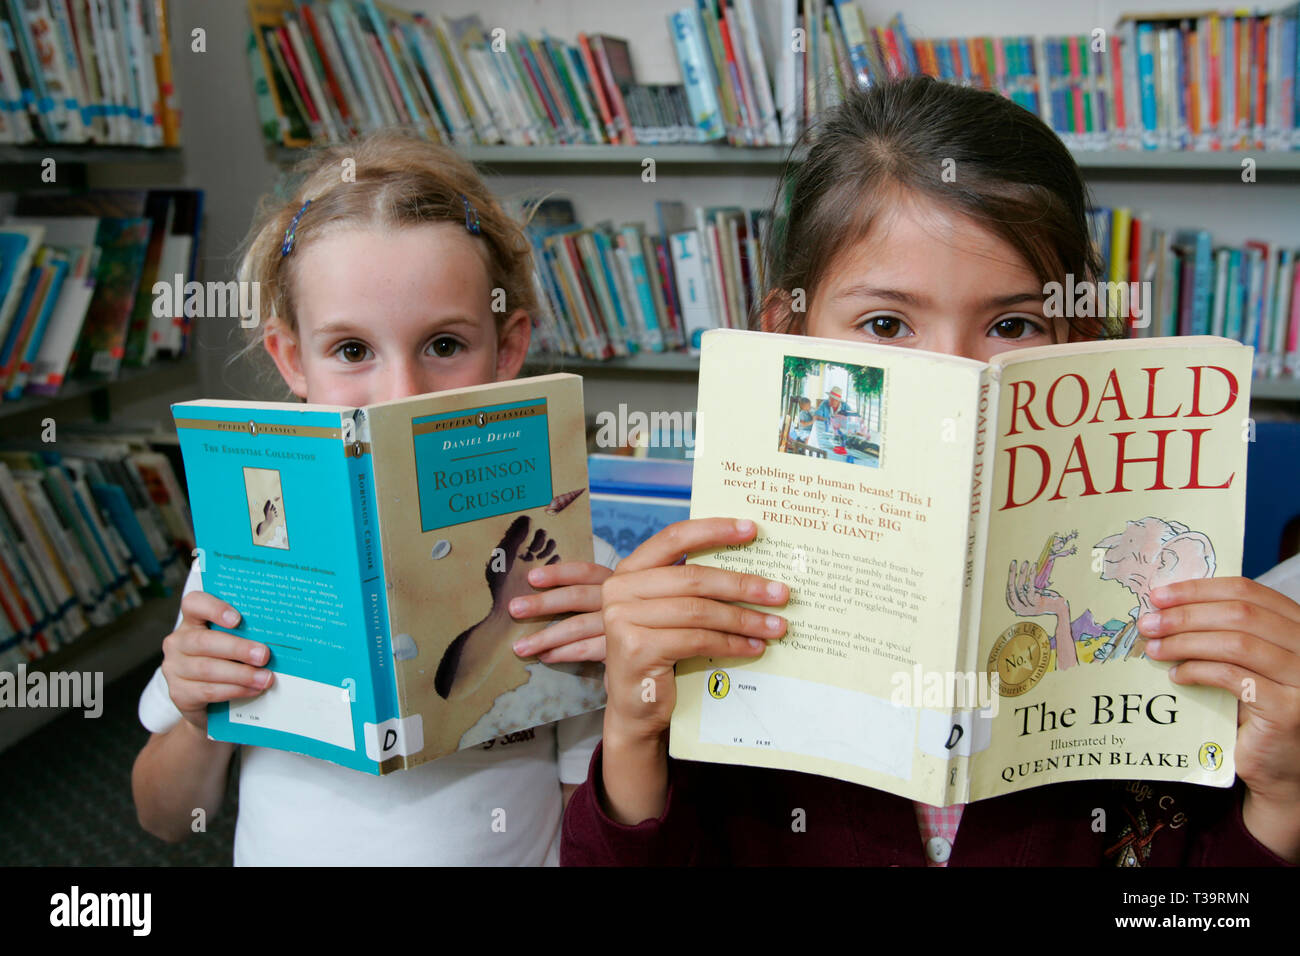 primary,school,pupils,kids,girl,boy,read,library,junior,Roald Dahl,The BFG, children's,book,books,peering,over,book,books,southern,England, Stock Photo